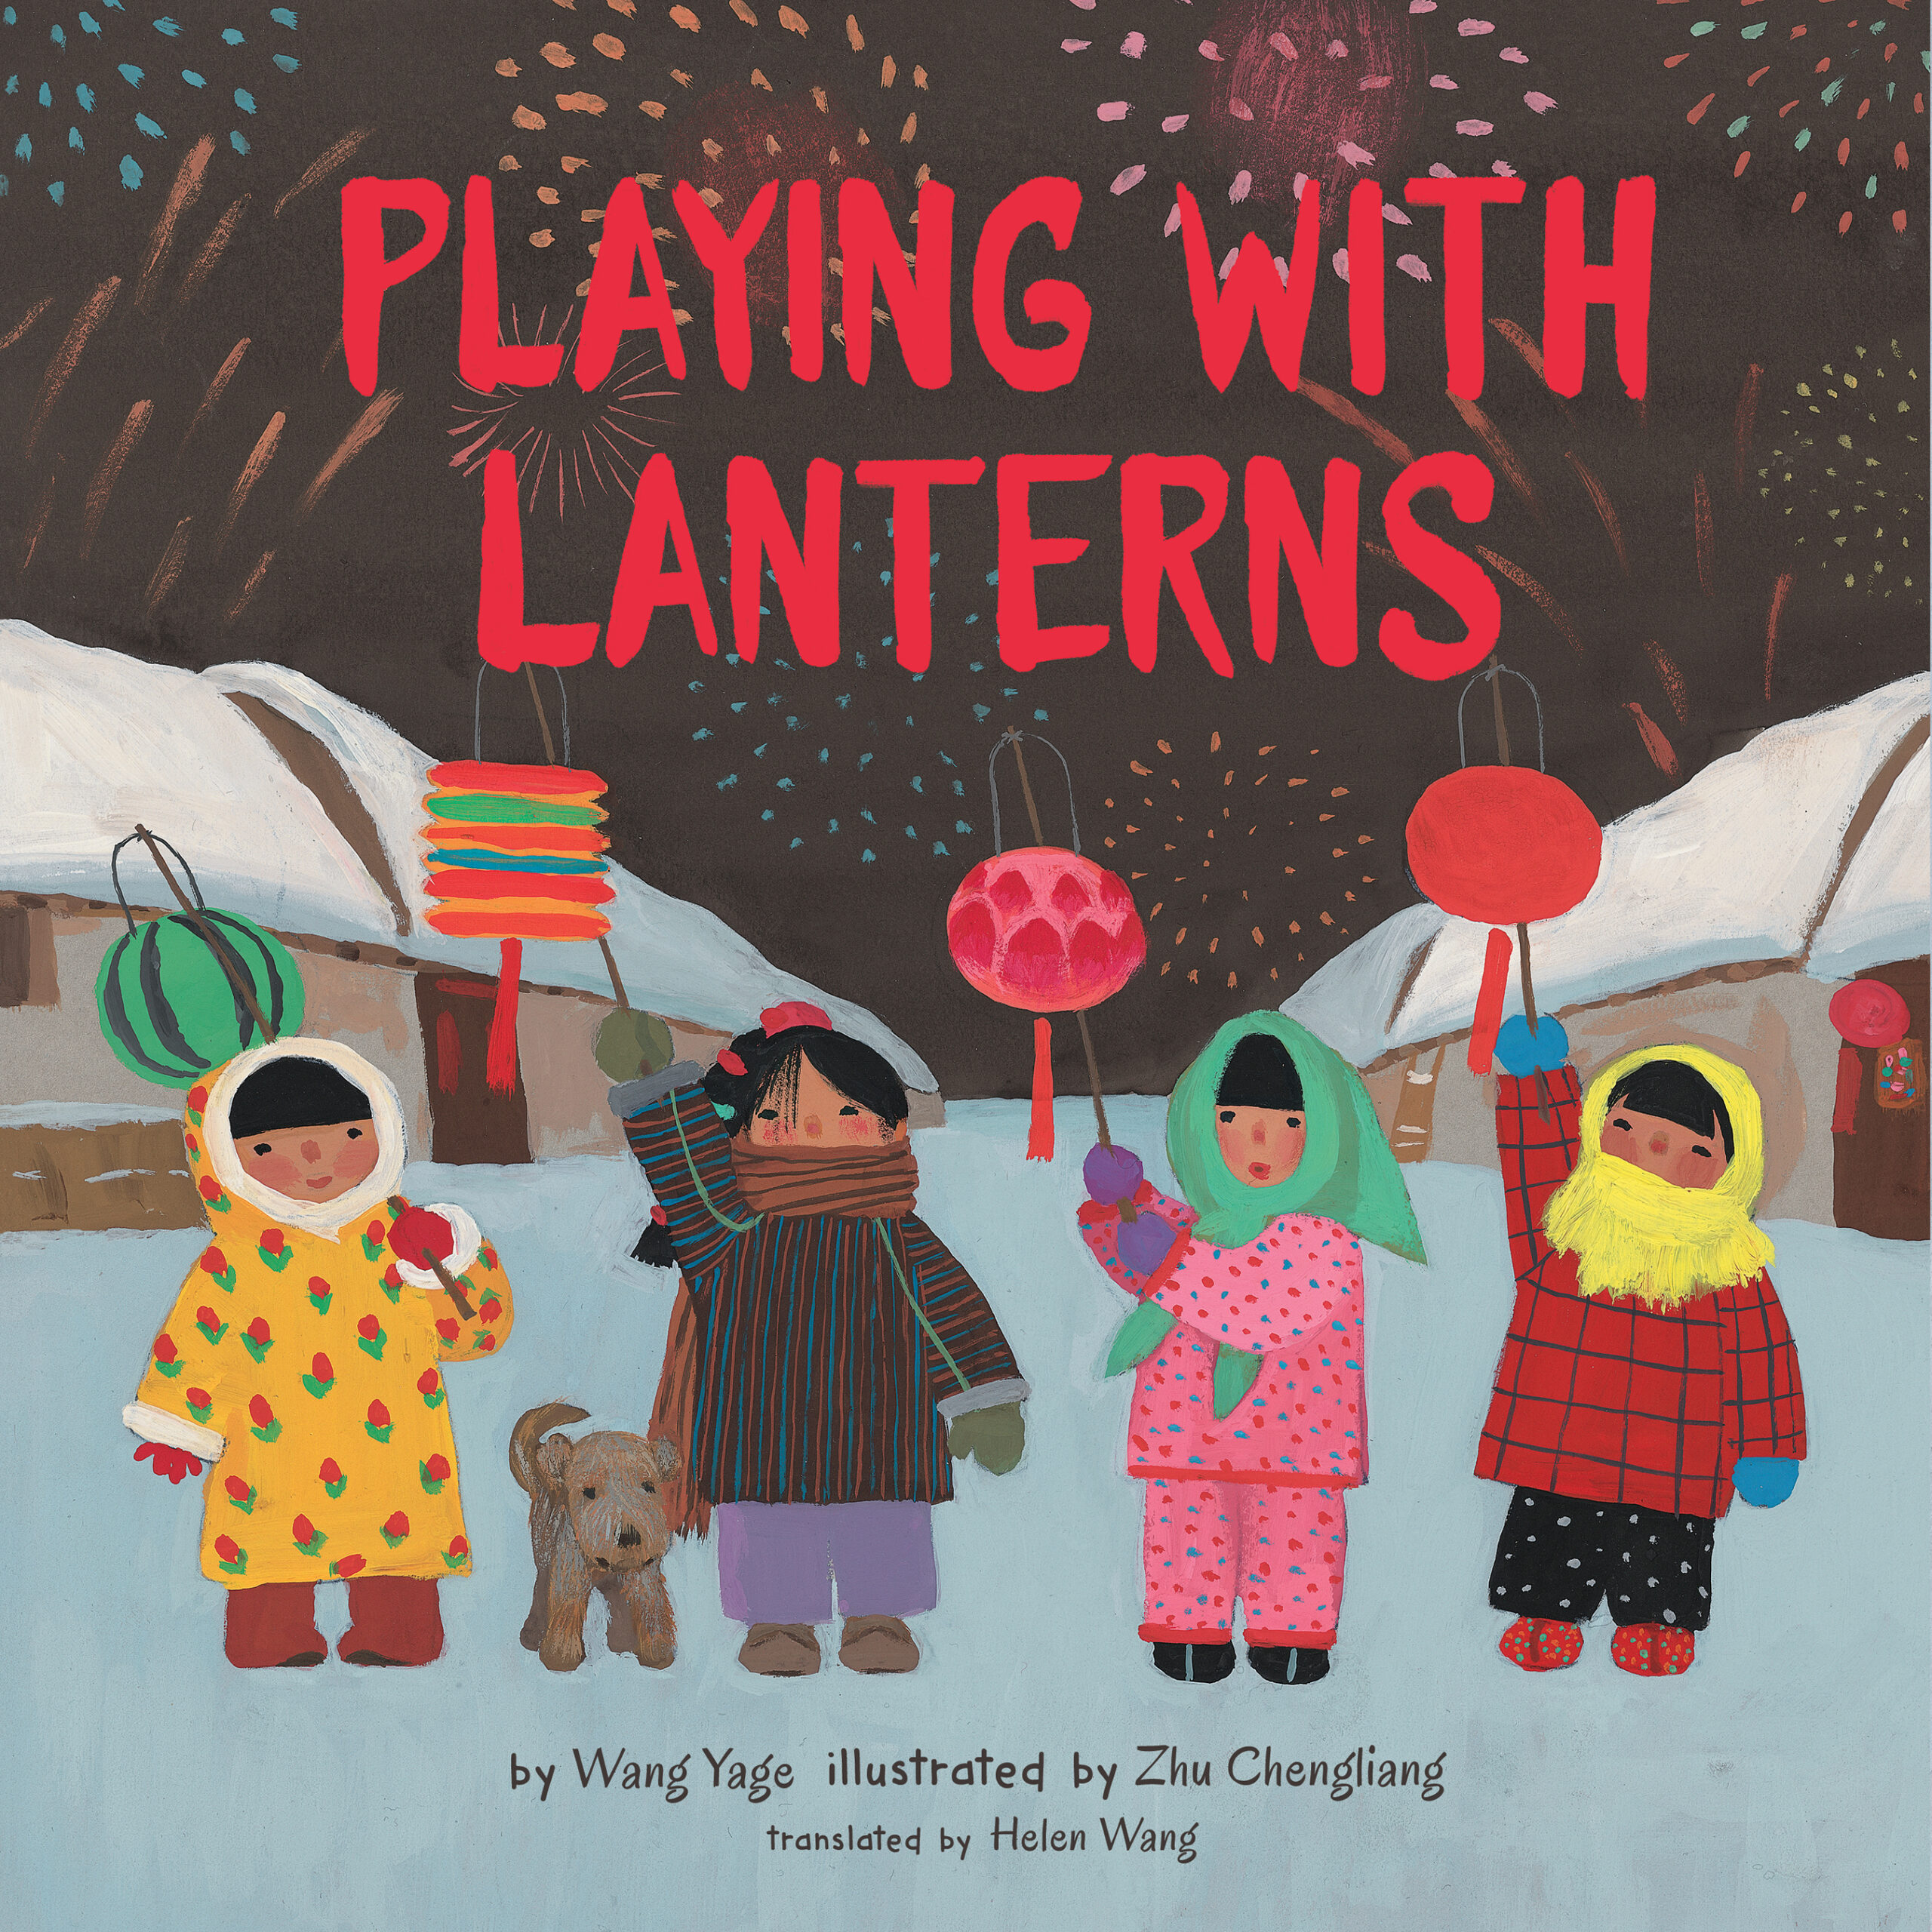 Cover of Playing with Lanterns featuring an illustration of four children holding lanterns on a snowy night with houses in the background and fireworks in the sky behind them.